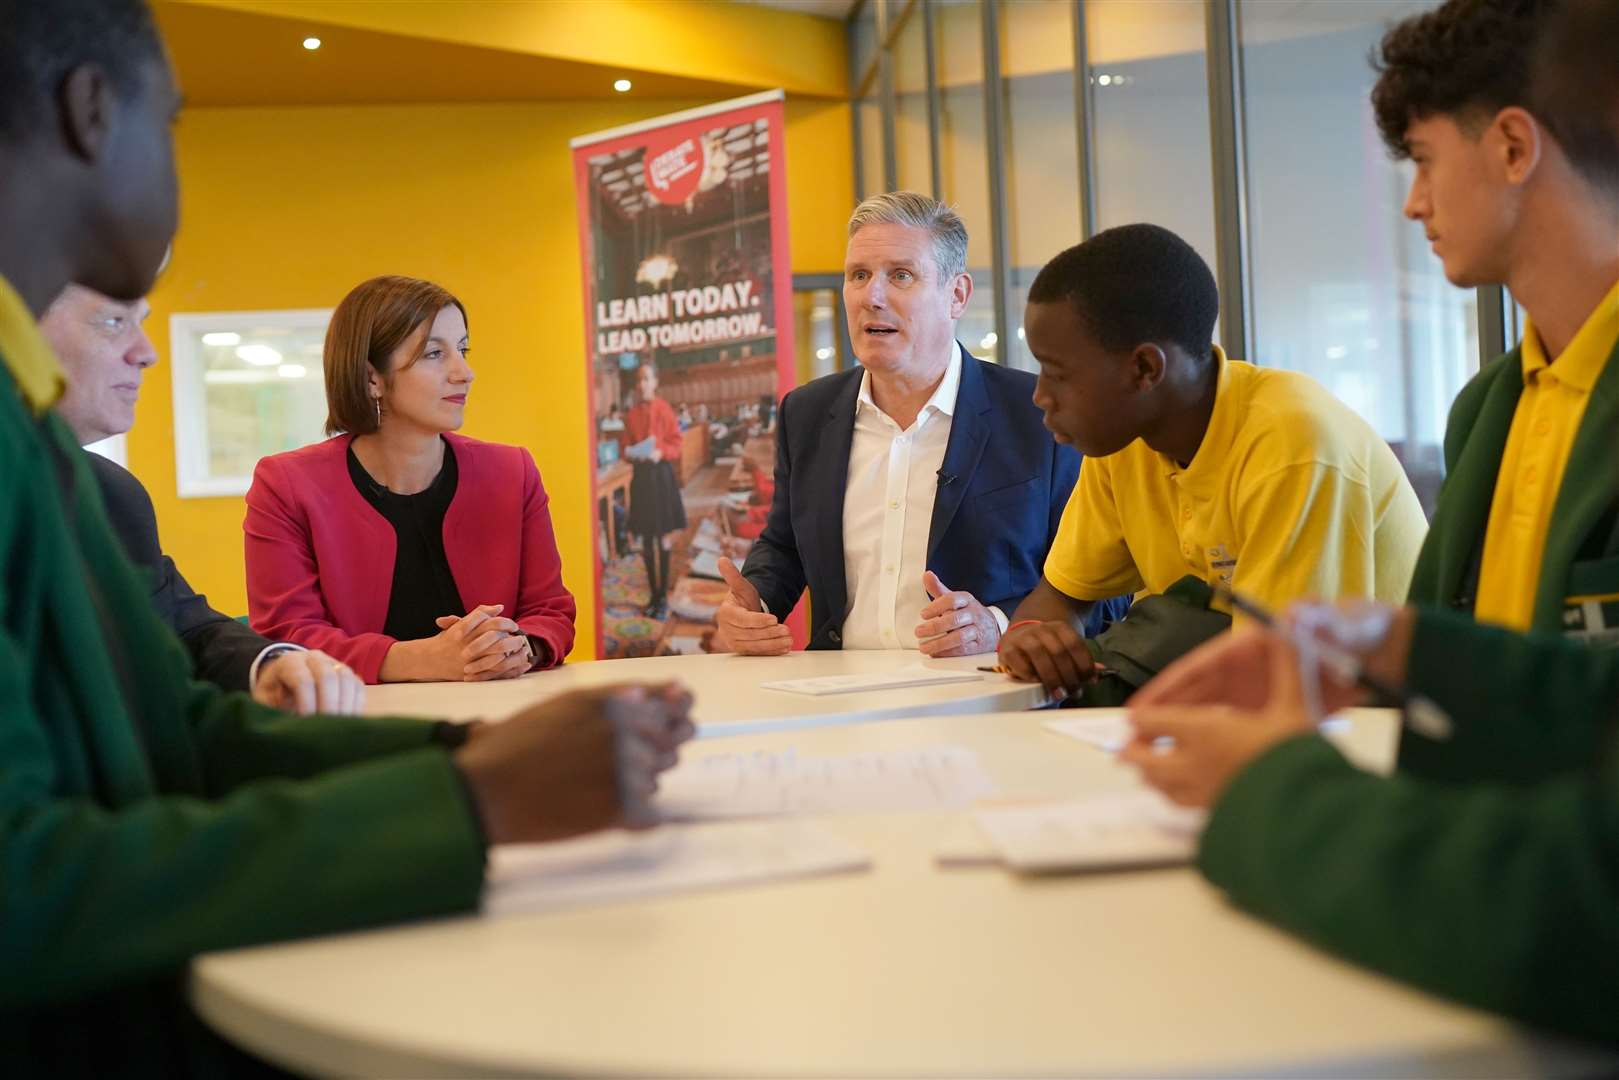 Labour leader Sir Keir Starmer and shadow education secretary Bridget Phillipson during a visit to the Sydney Russell School in Dagenham on Monday (Gareth Fuller/PA)